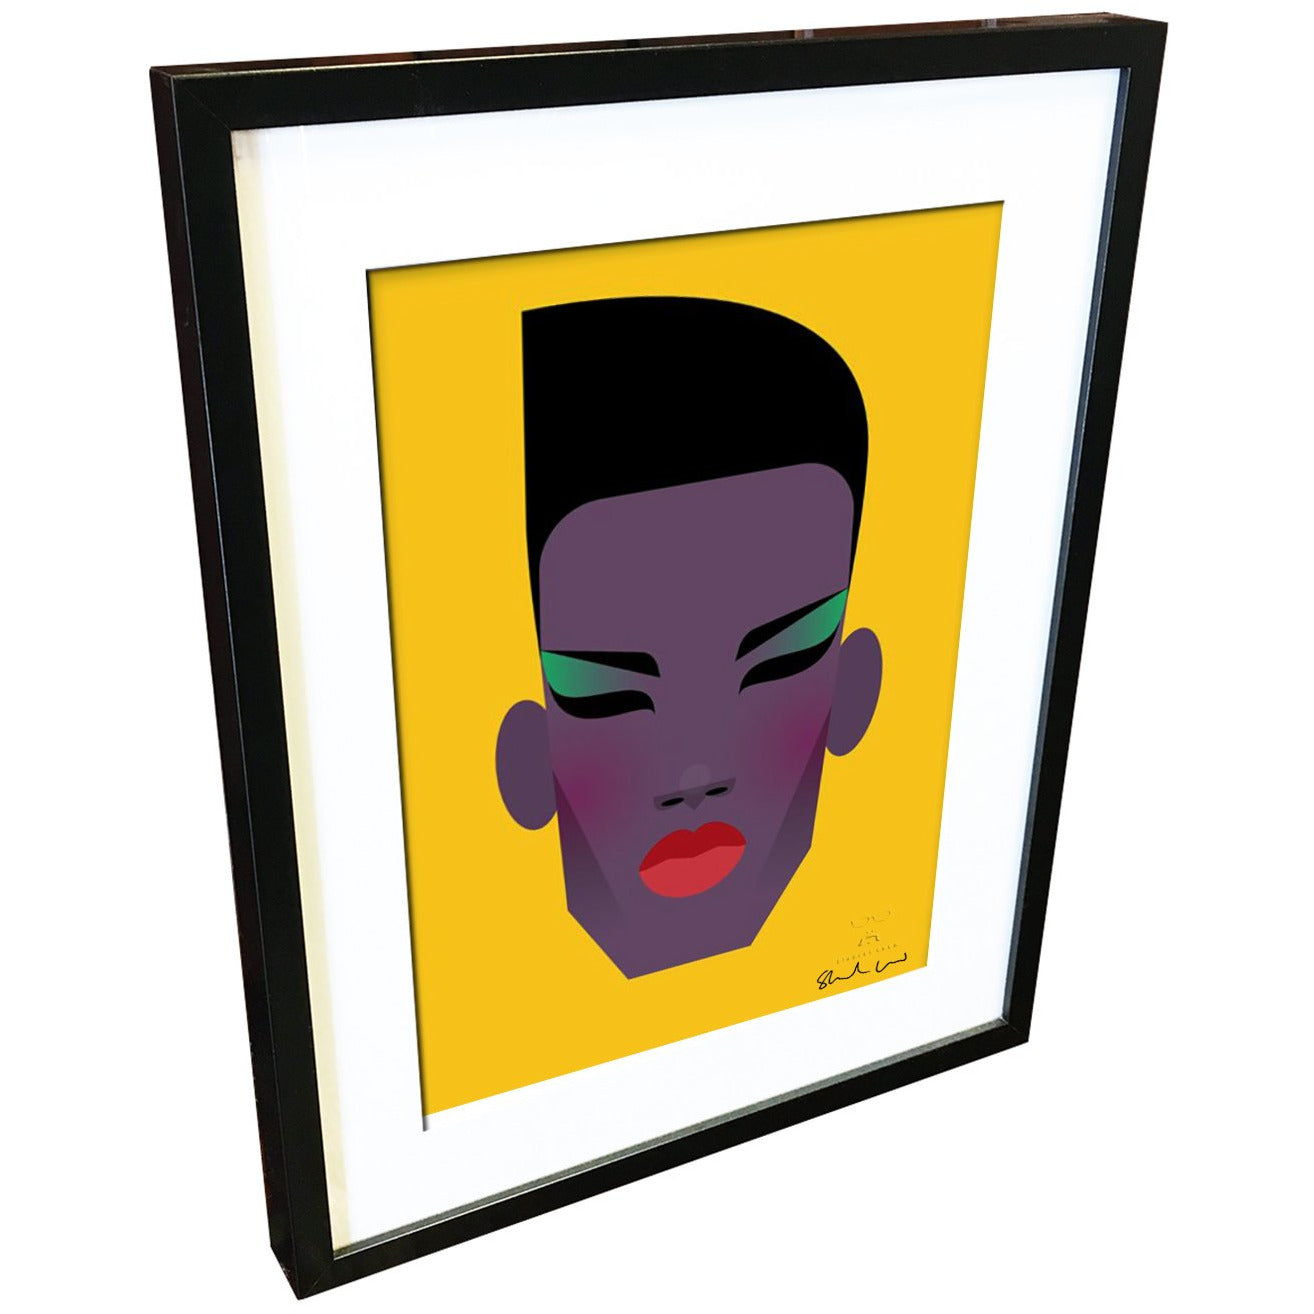 Grace Jones by Stanley Chow - Signed and stamped fine art print - Egoiste Gallery - Art Gallery in Manchester City Centre